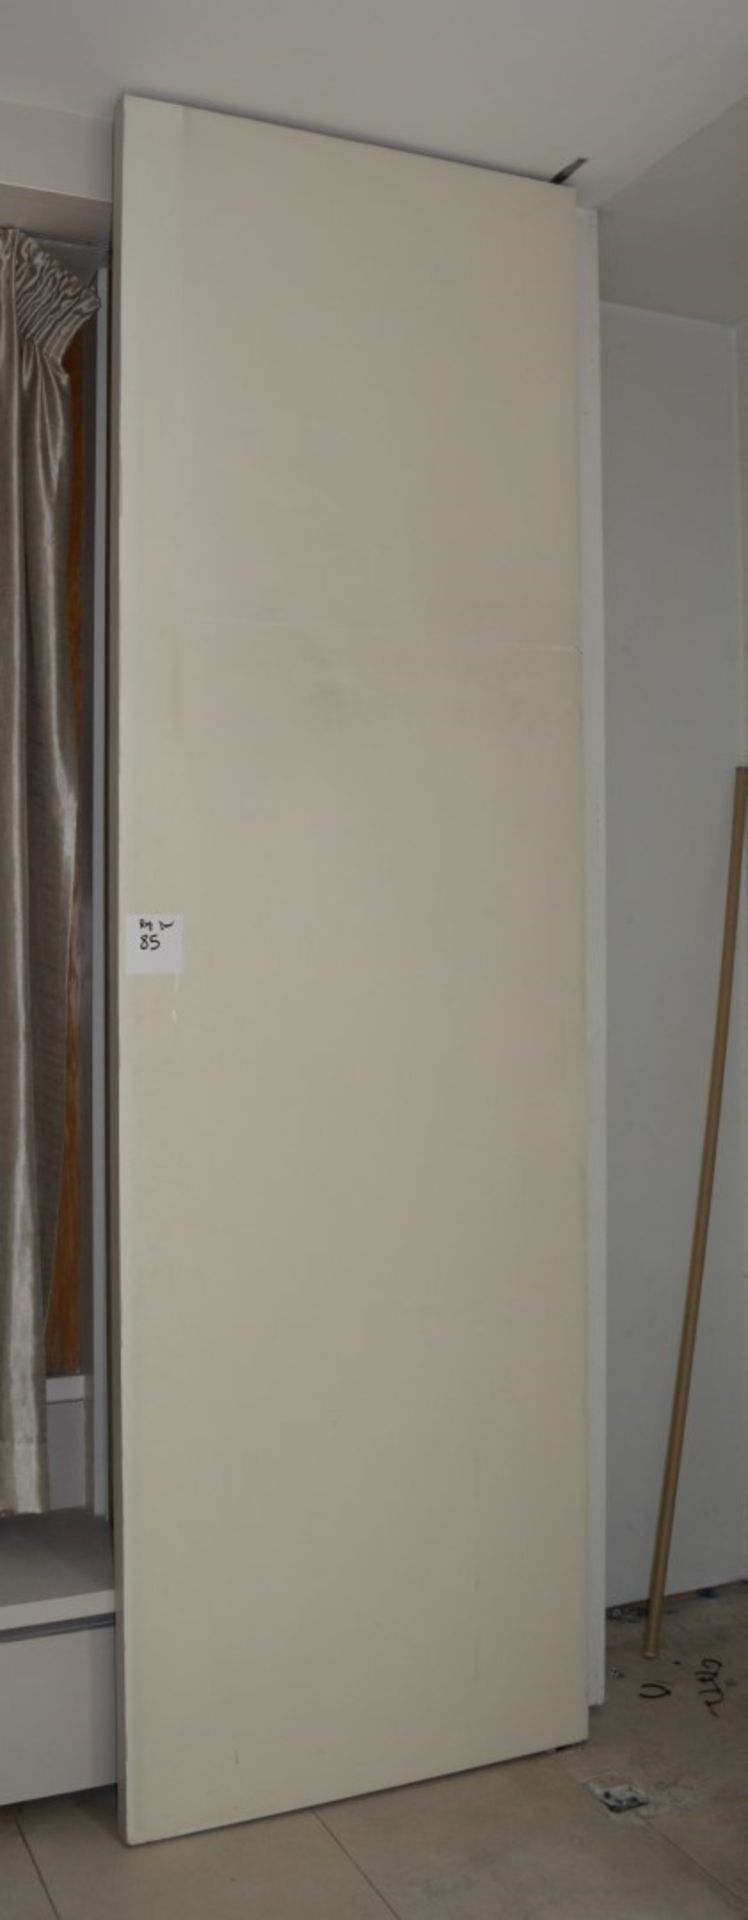 1 x Fire Resistant Internal Door - Includes Hnges - Over 10 Feet Tall - H308x W93.5 x D5.5cm - CL230 - Image 2 of 6